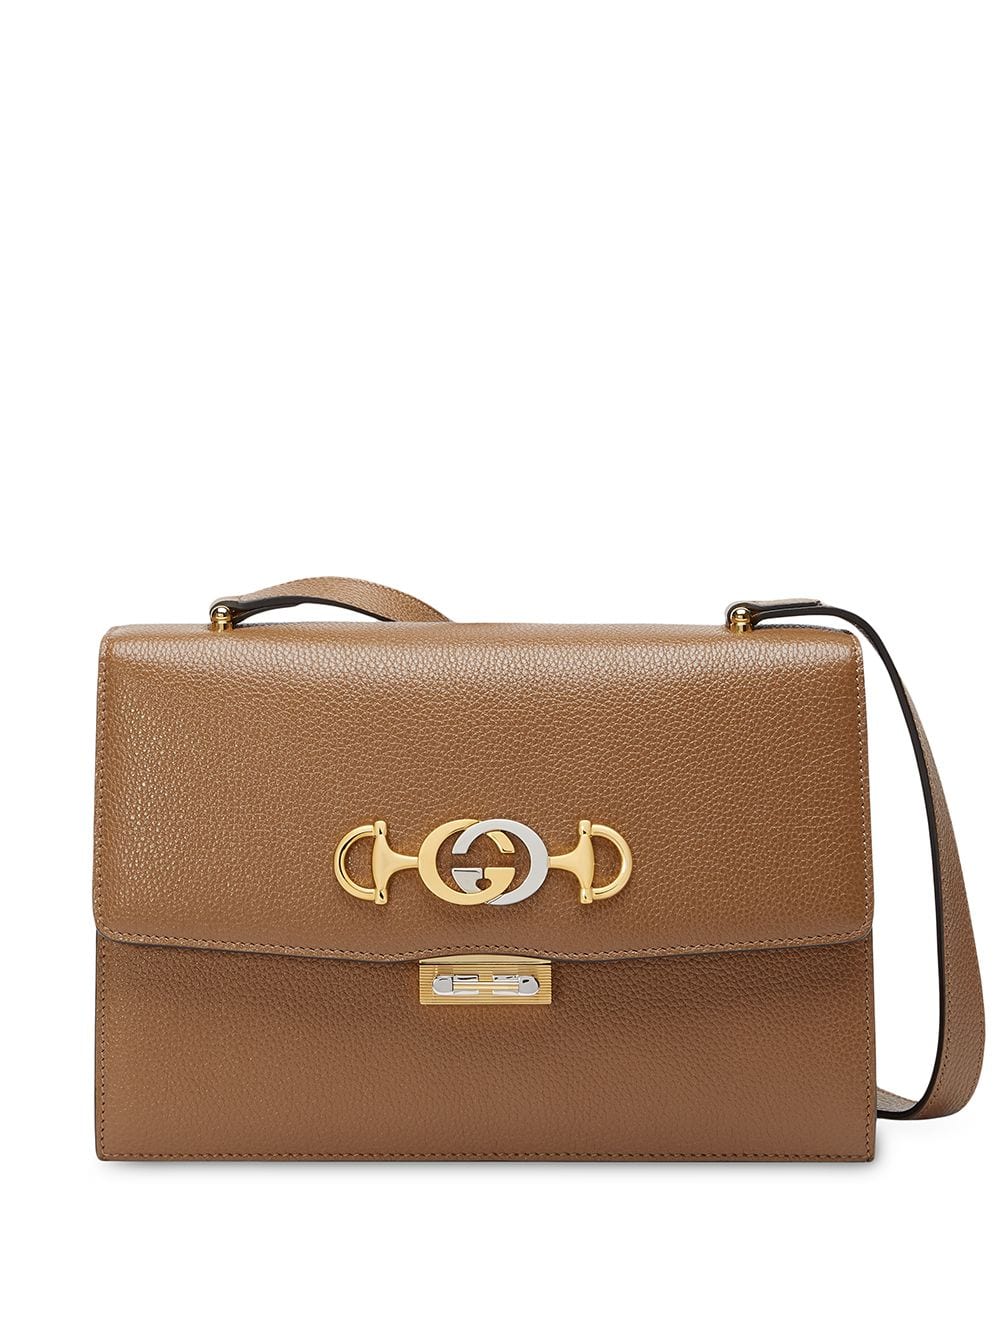 Gucci - Zumi Small Shoulder Bag | ABOUT ICONS